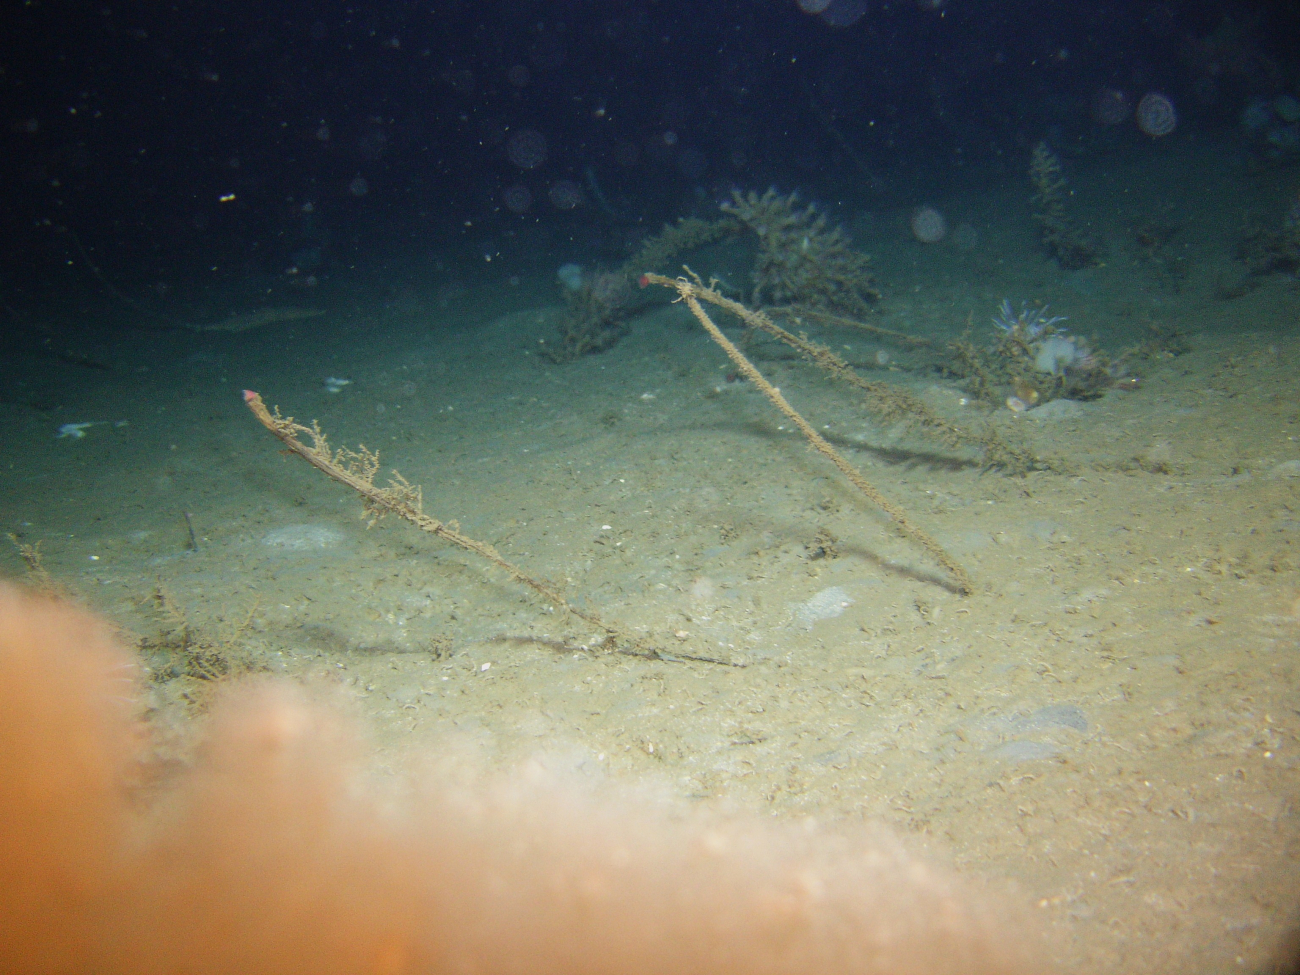 Widely dispersed tube worms